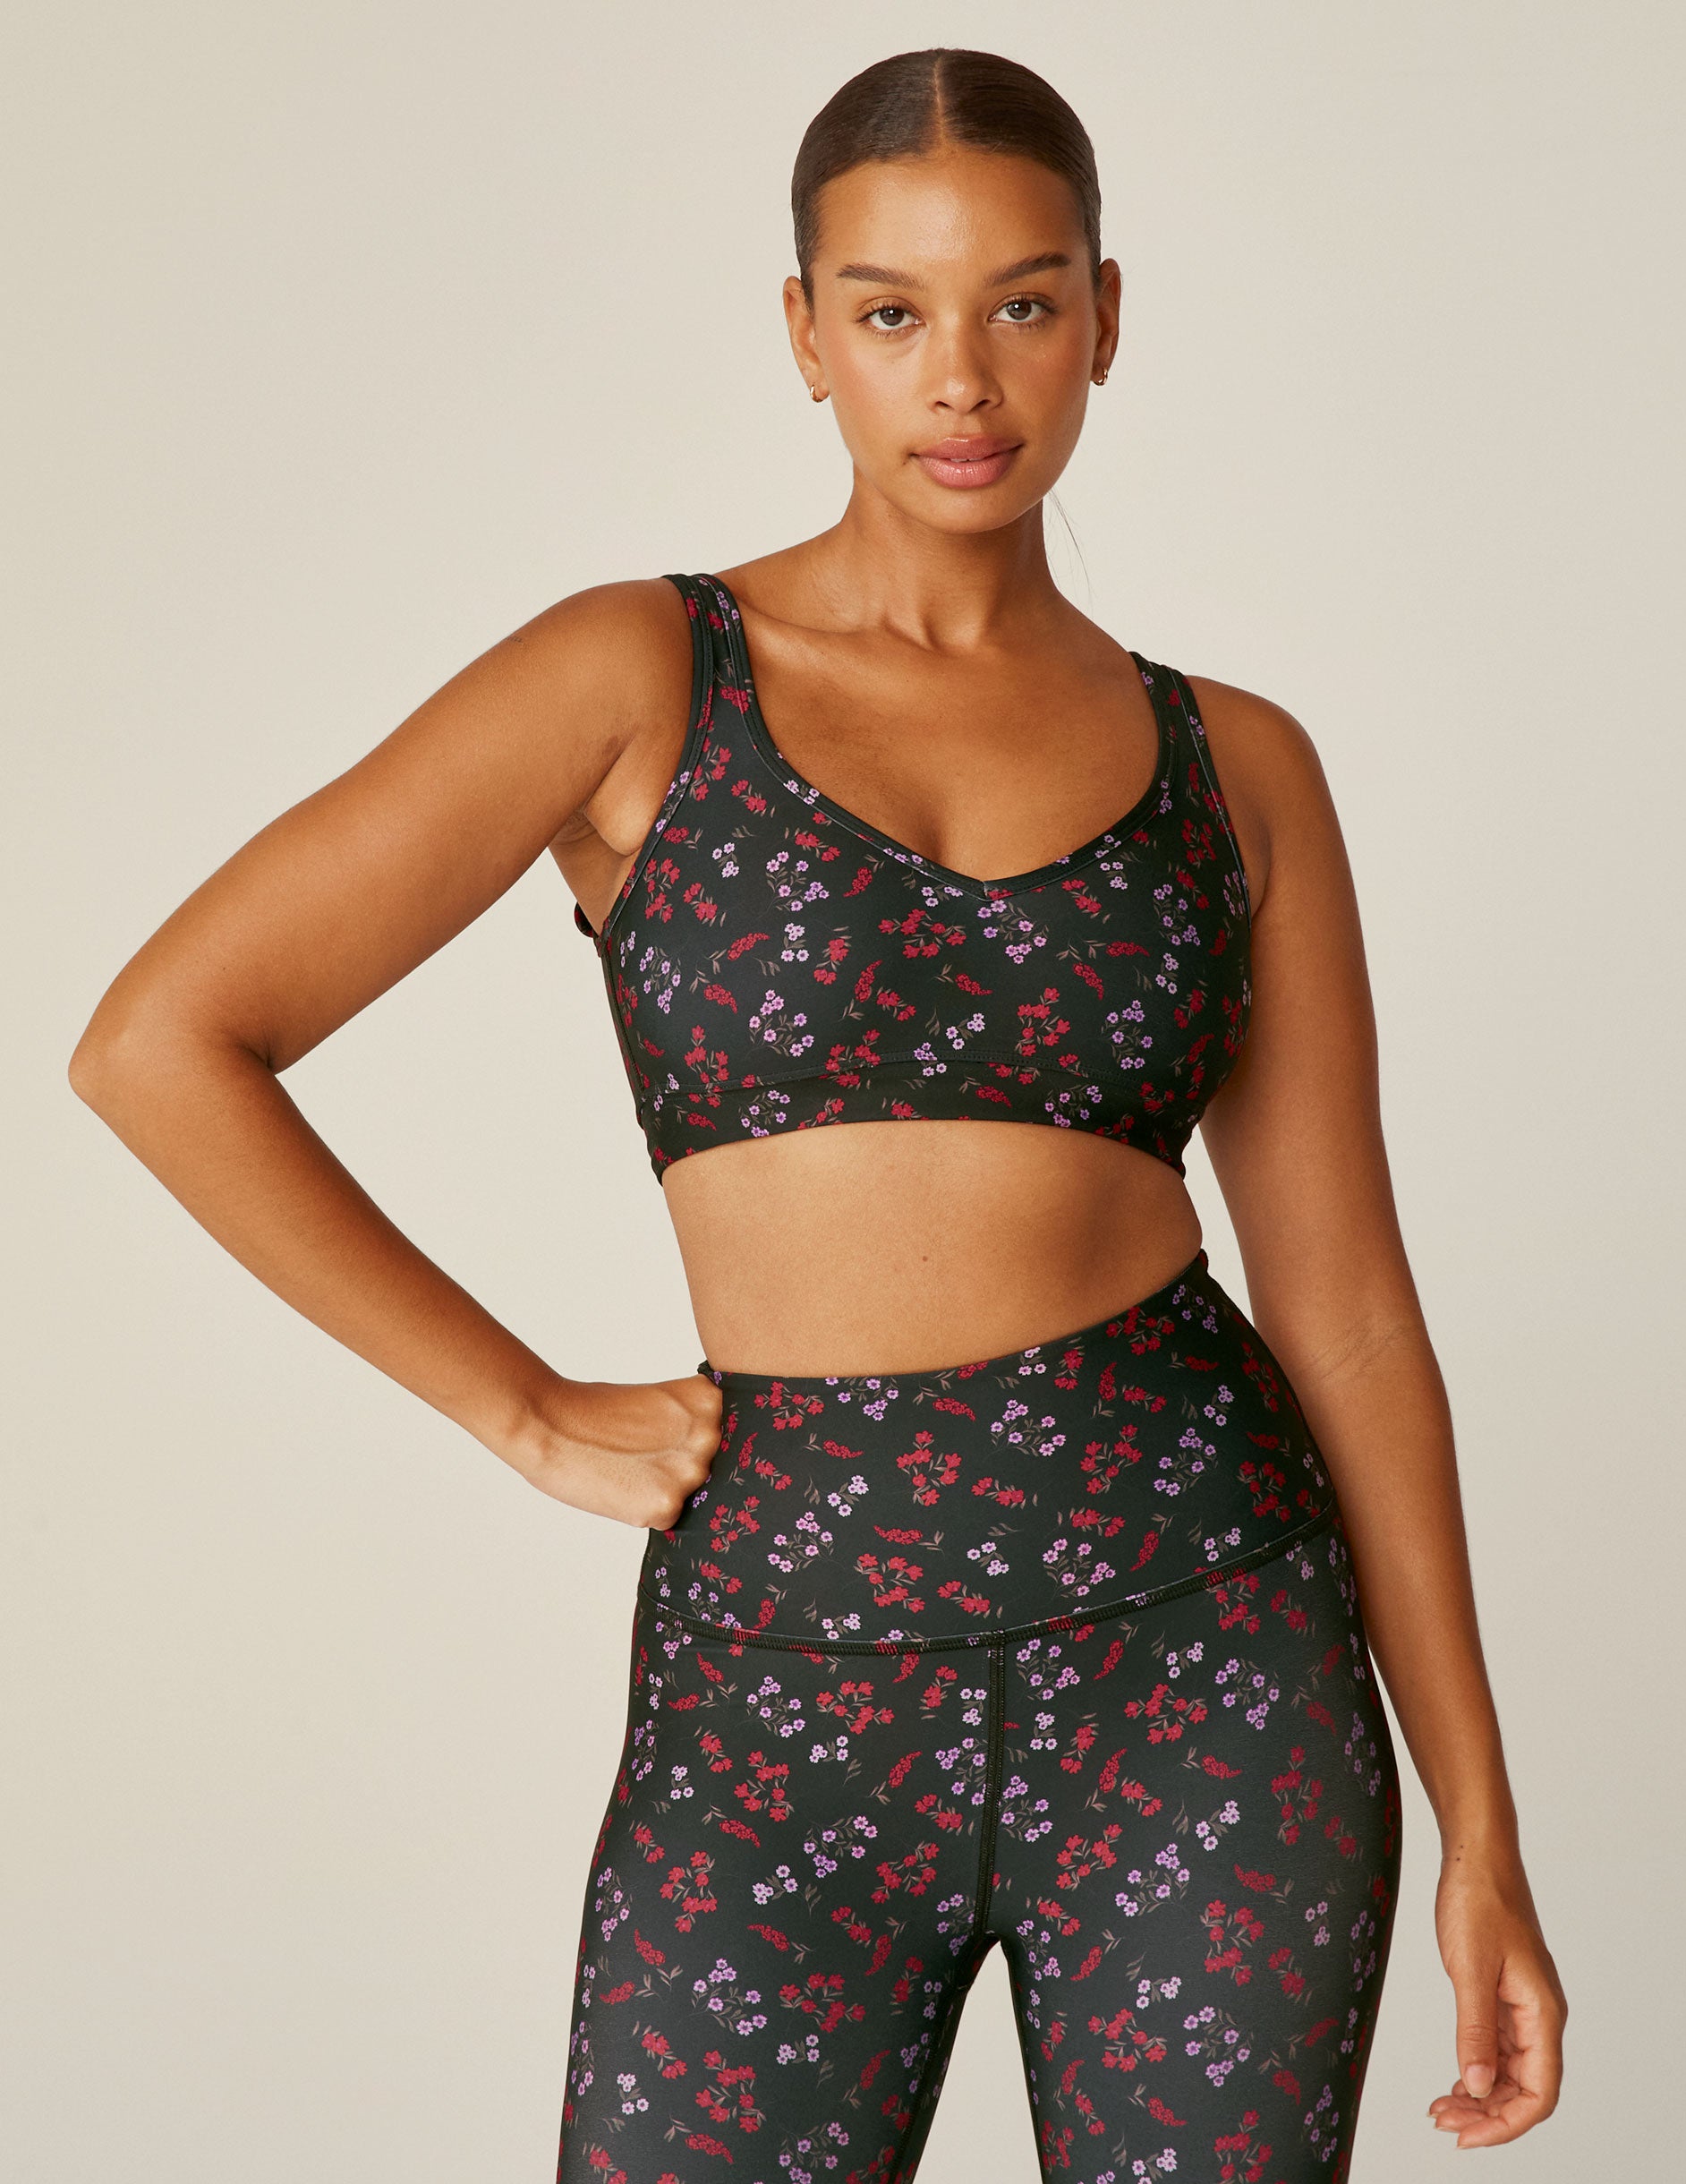 black floral printed (red and purple flowers) sweetheart neckline sports bra. 